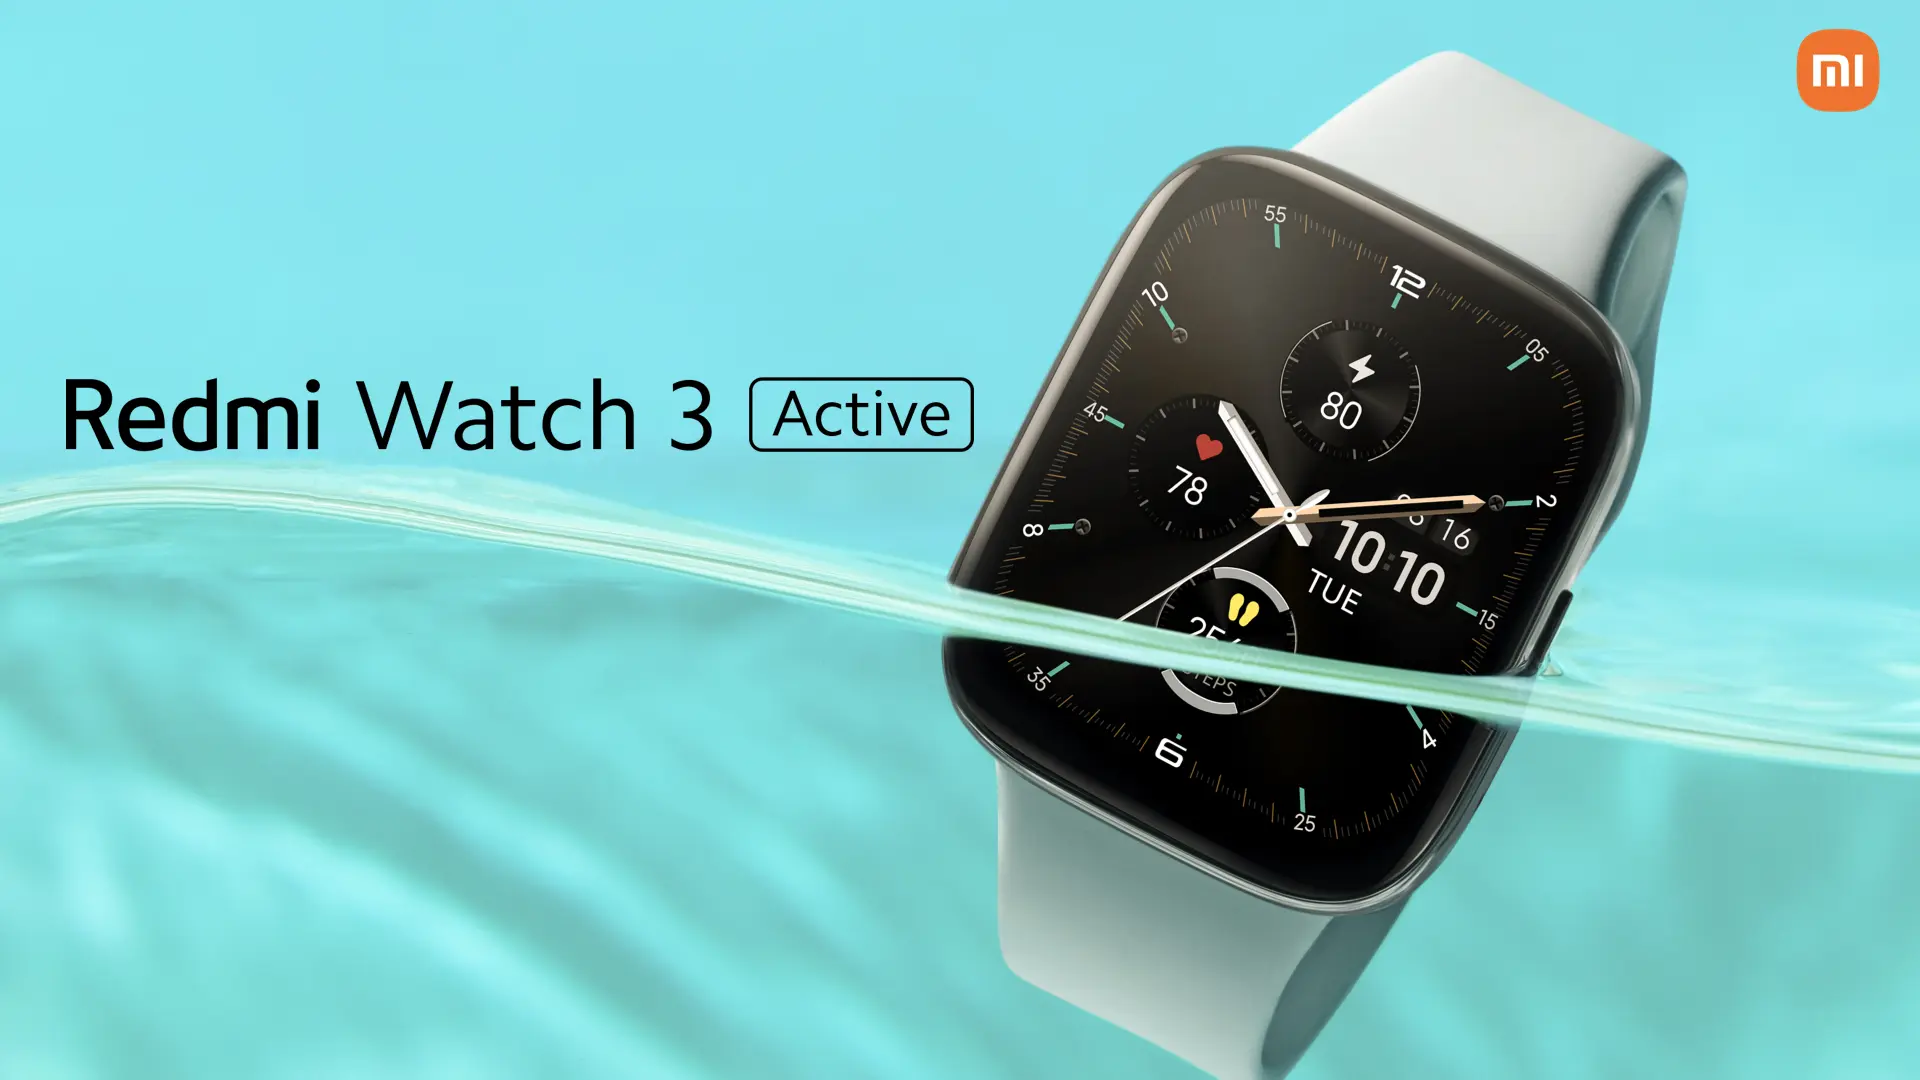 This is the Redmi Watch 3 Active - Here's why you might need it too!